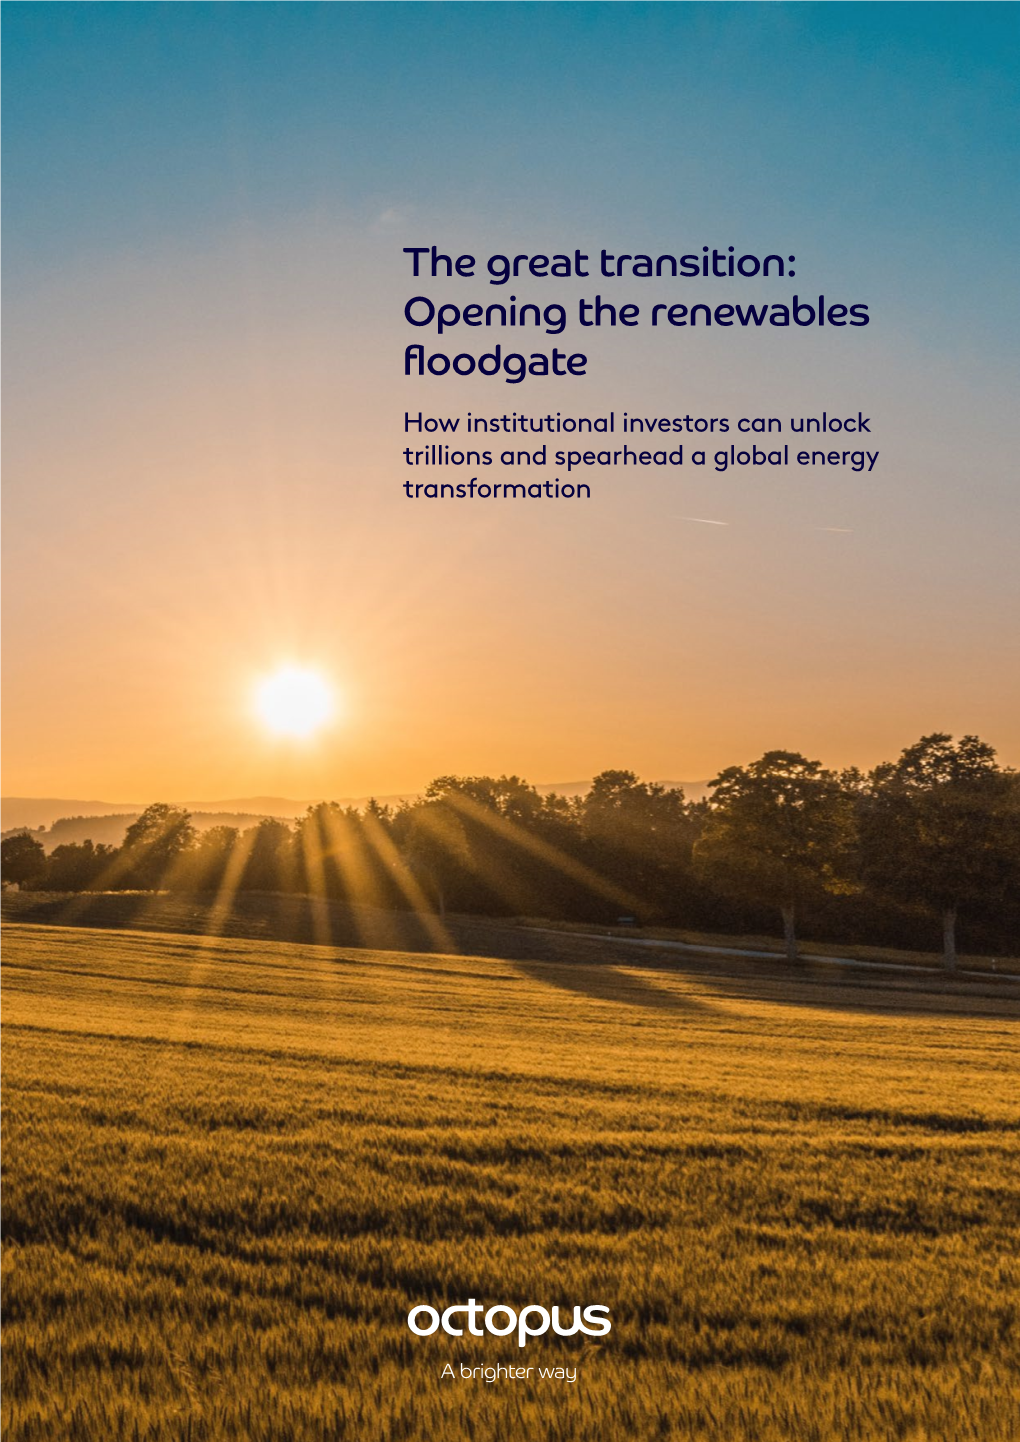 The Great Transition: Opening the Renewables Floodgate